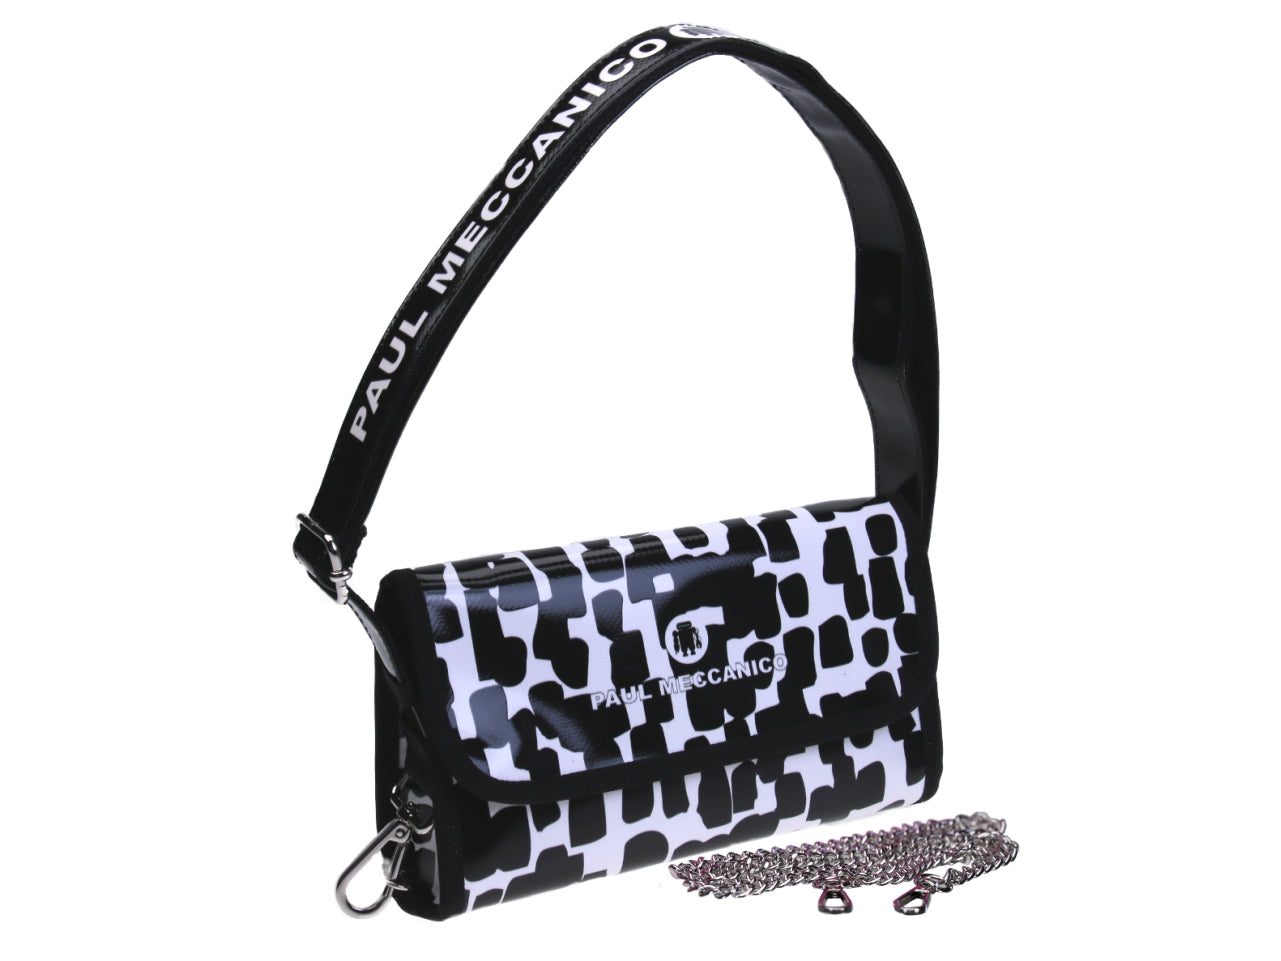 CLUTCH BAG BLACK AND WHITE. MODEL CANDY MADE OF LORRY TARPAULIN. - Limited Edition Paul Meccanico